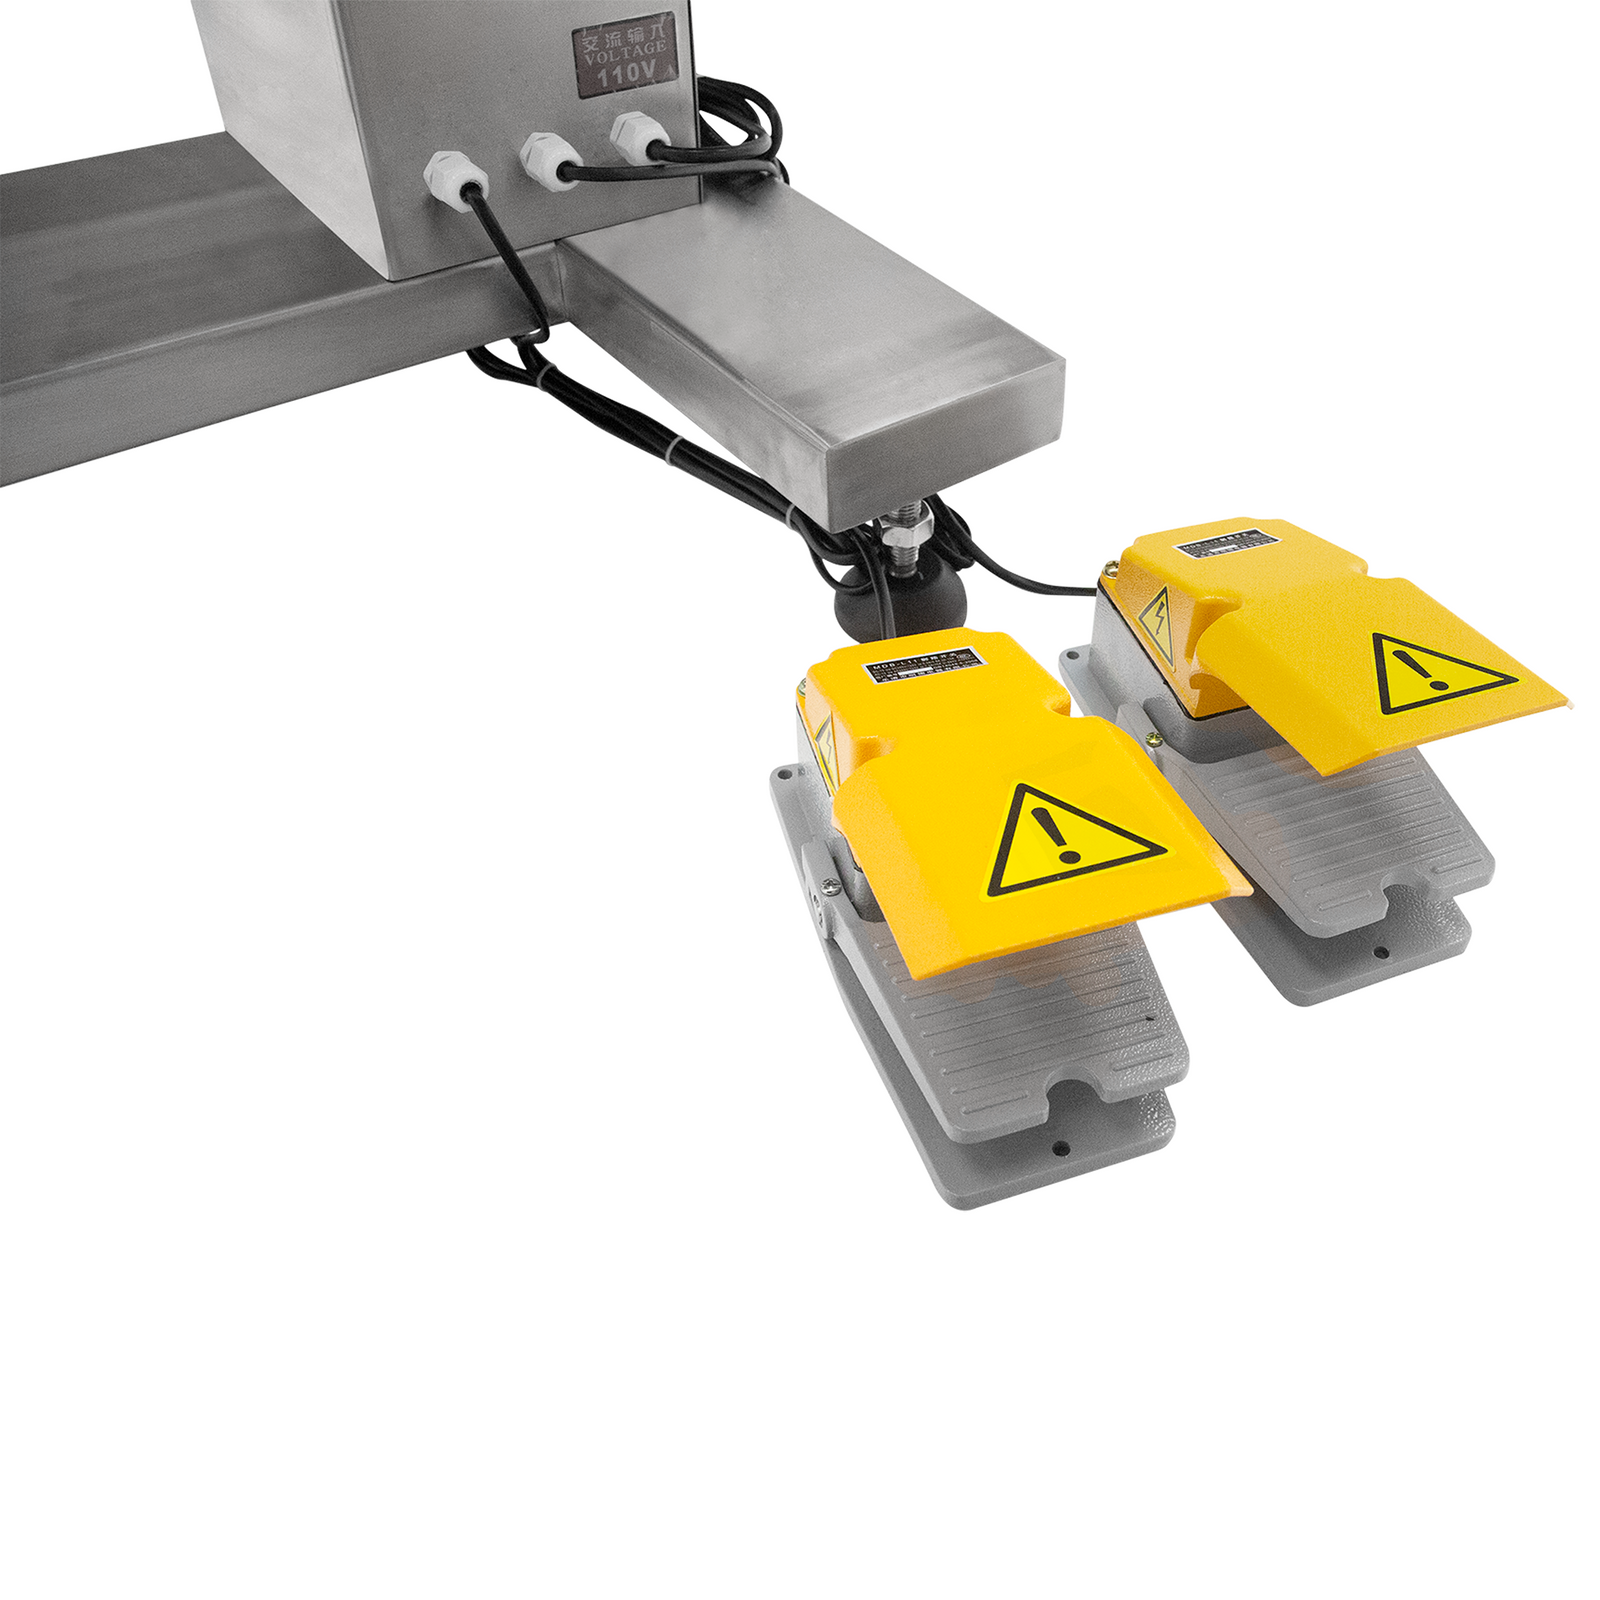 Two foot pedals with yellow safety foot coverings belonging to the automatic Jorestech dual head high viscosity filling system